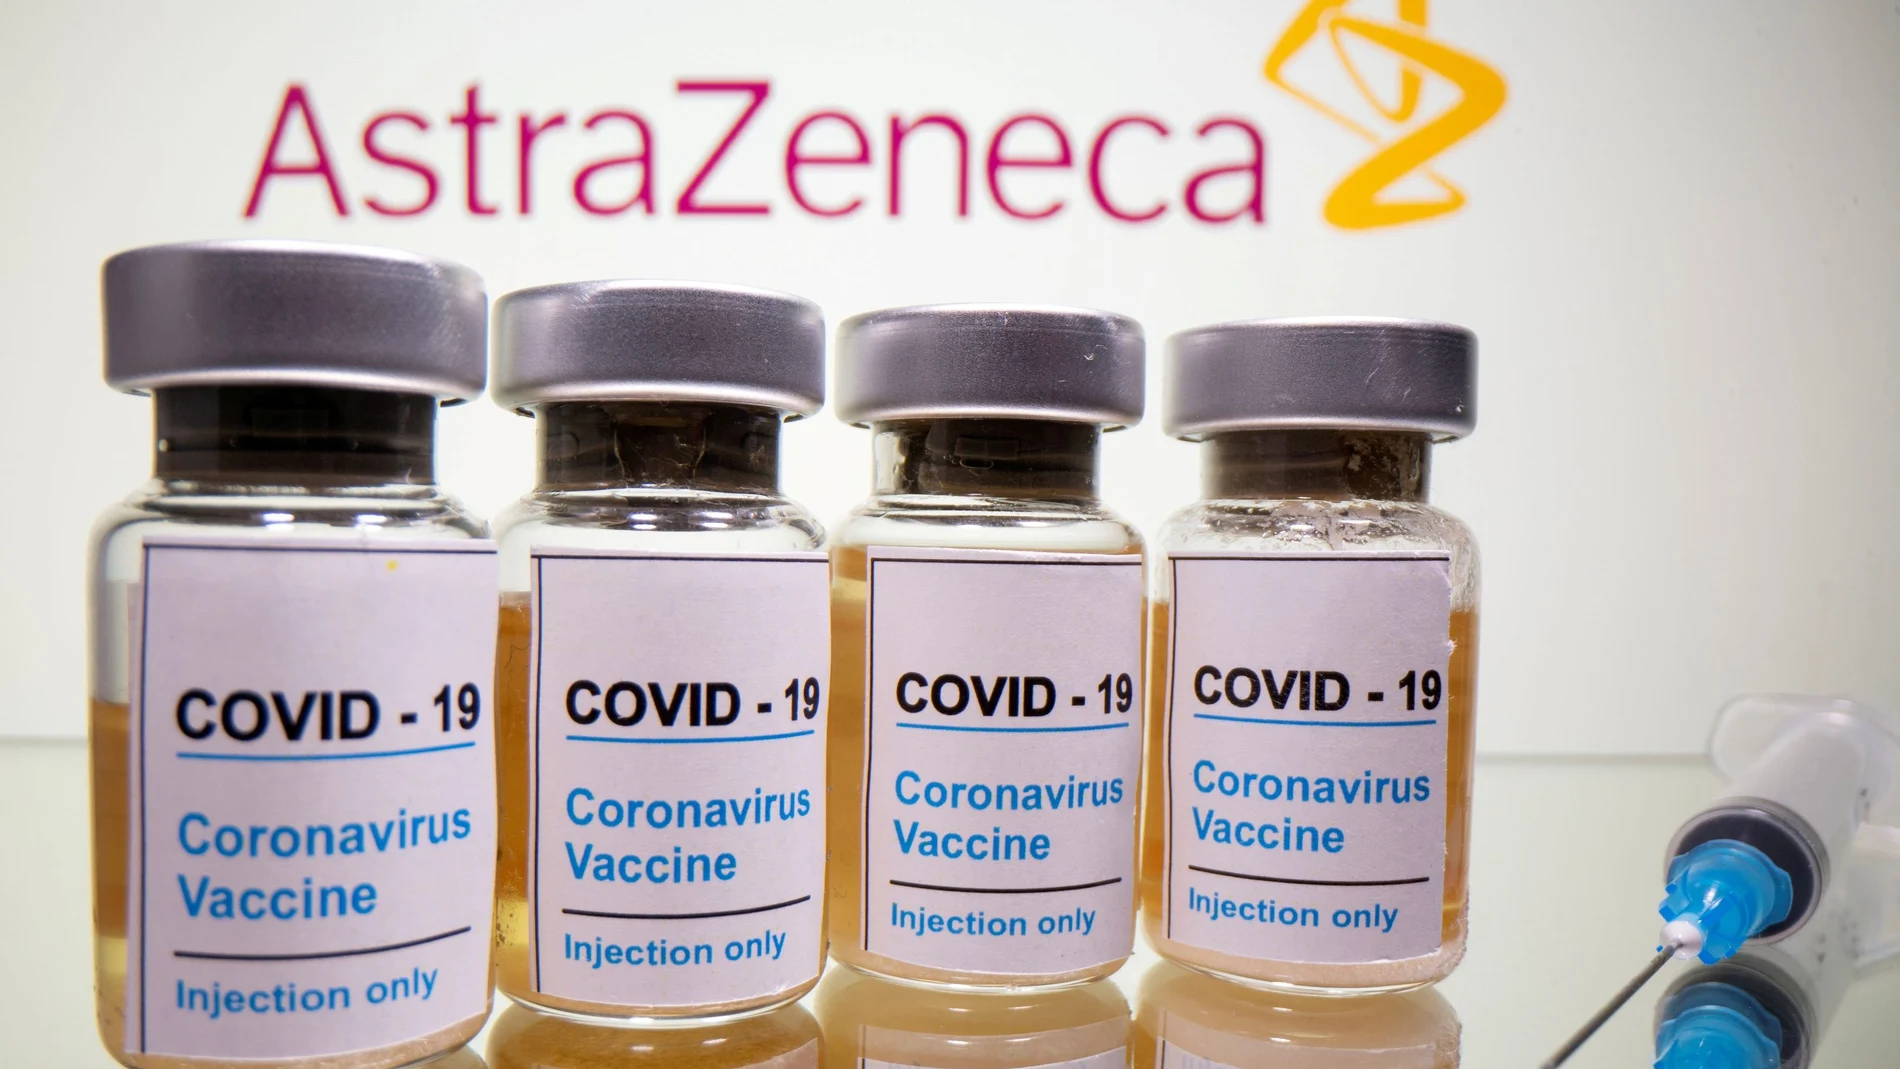 FILE PHOTO: Vials with a sticker reading, "COVID-19 / Coronavirus vaccine / Injection only" and a medical syringe are seen in front of a displayed AstraZeneca logo in this illustration taken October 31, 2020. REUTERS/Dado Ruvic/File Photo